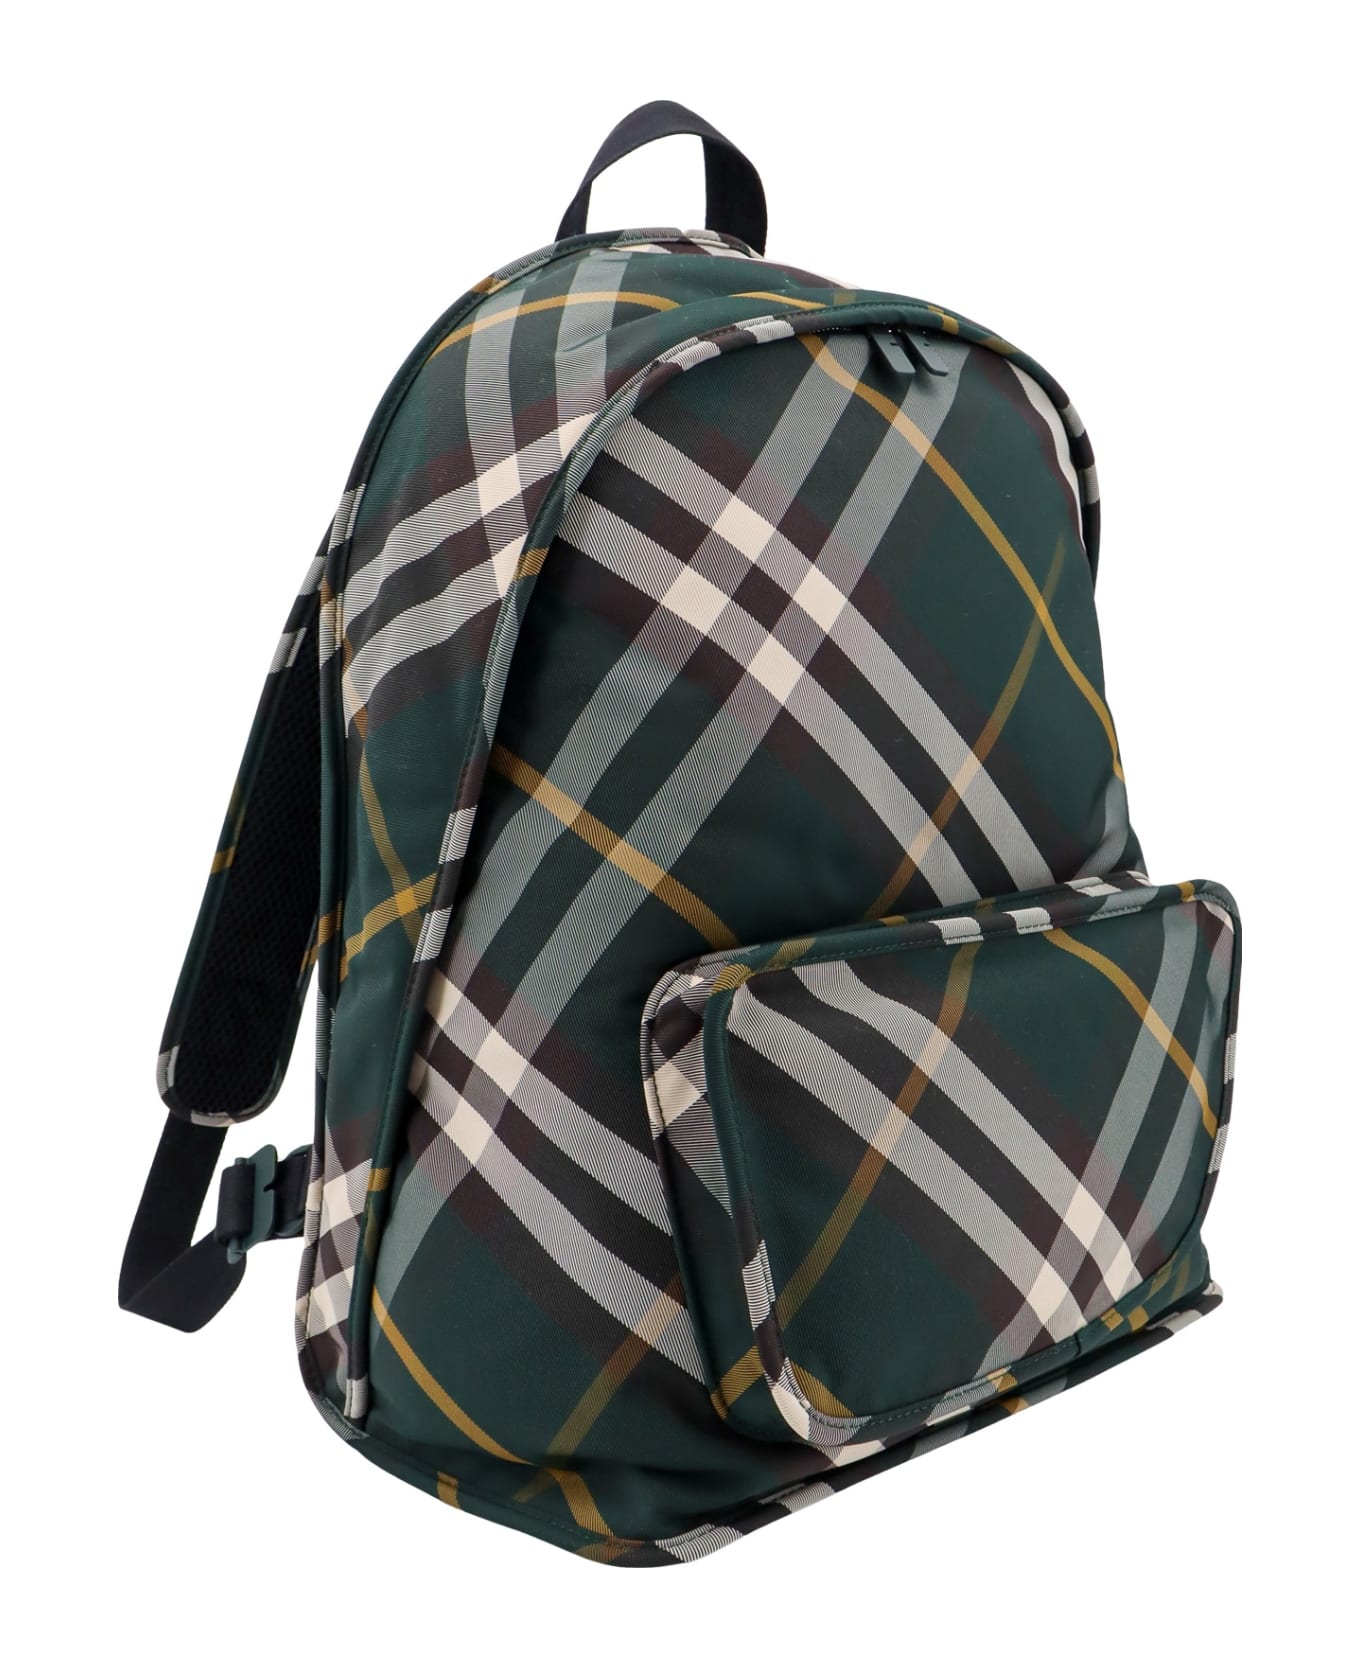 Burberry Backpack - Green バックパック